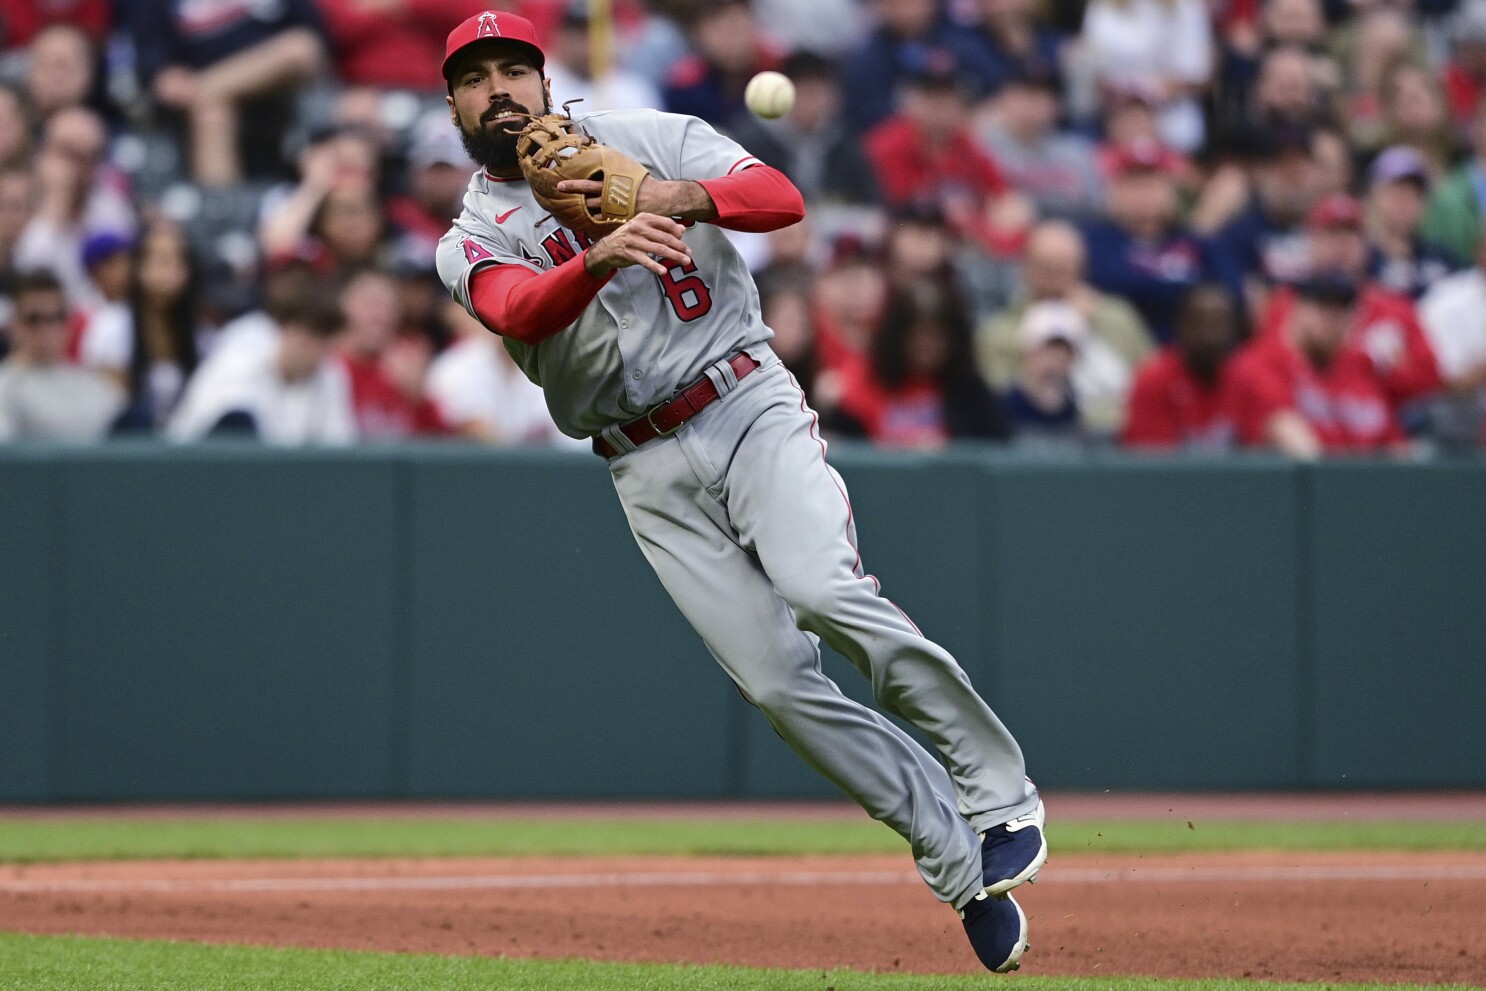 Angels' Anthony Rendon says his injury is a fracture, not a bone